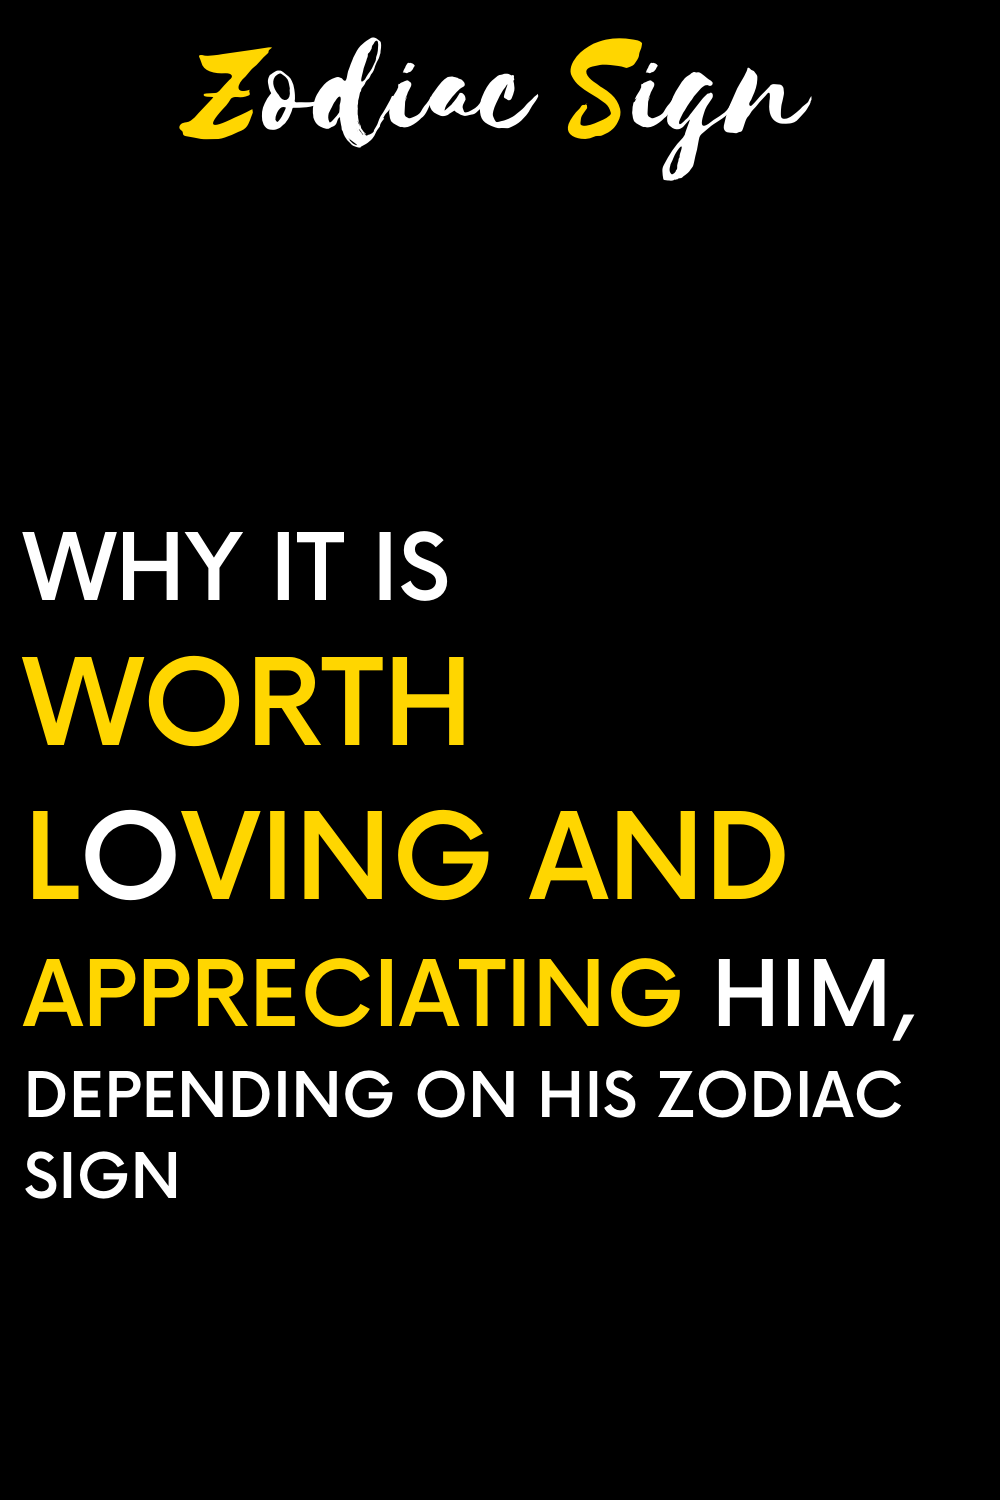 Why it is worth loving and appreciating him, depending on his zodiac sign